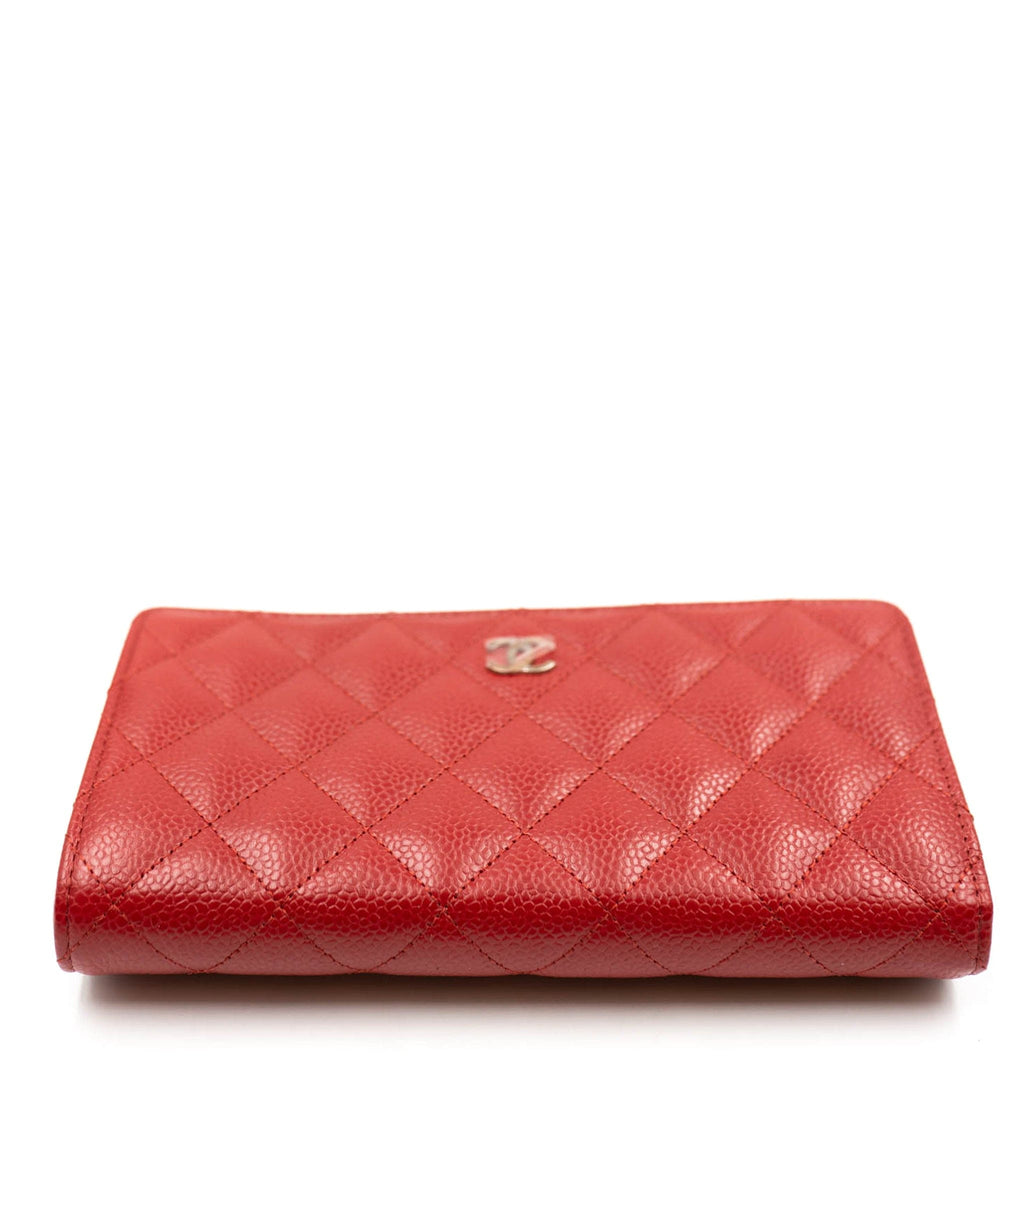 chanel long wallet red leather